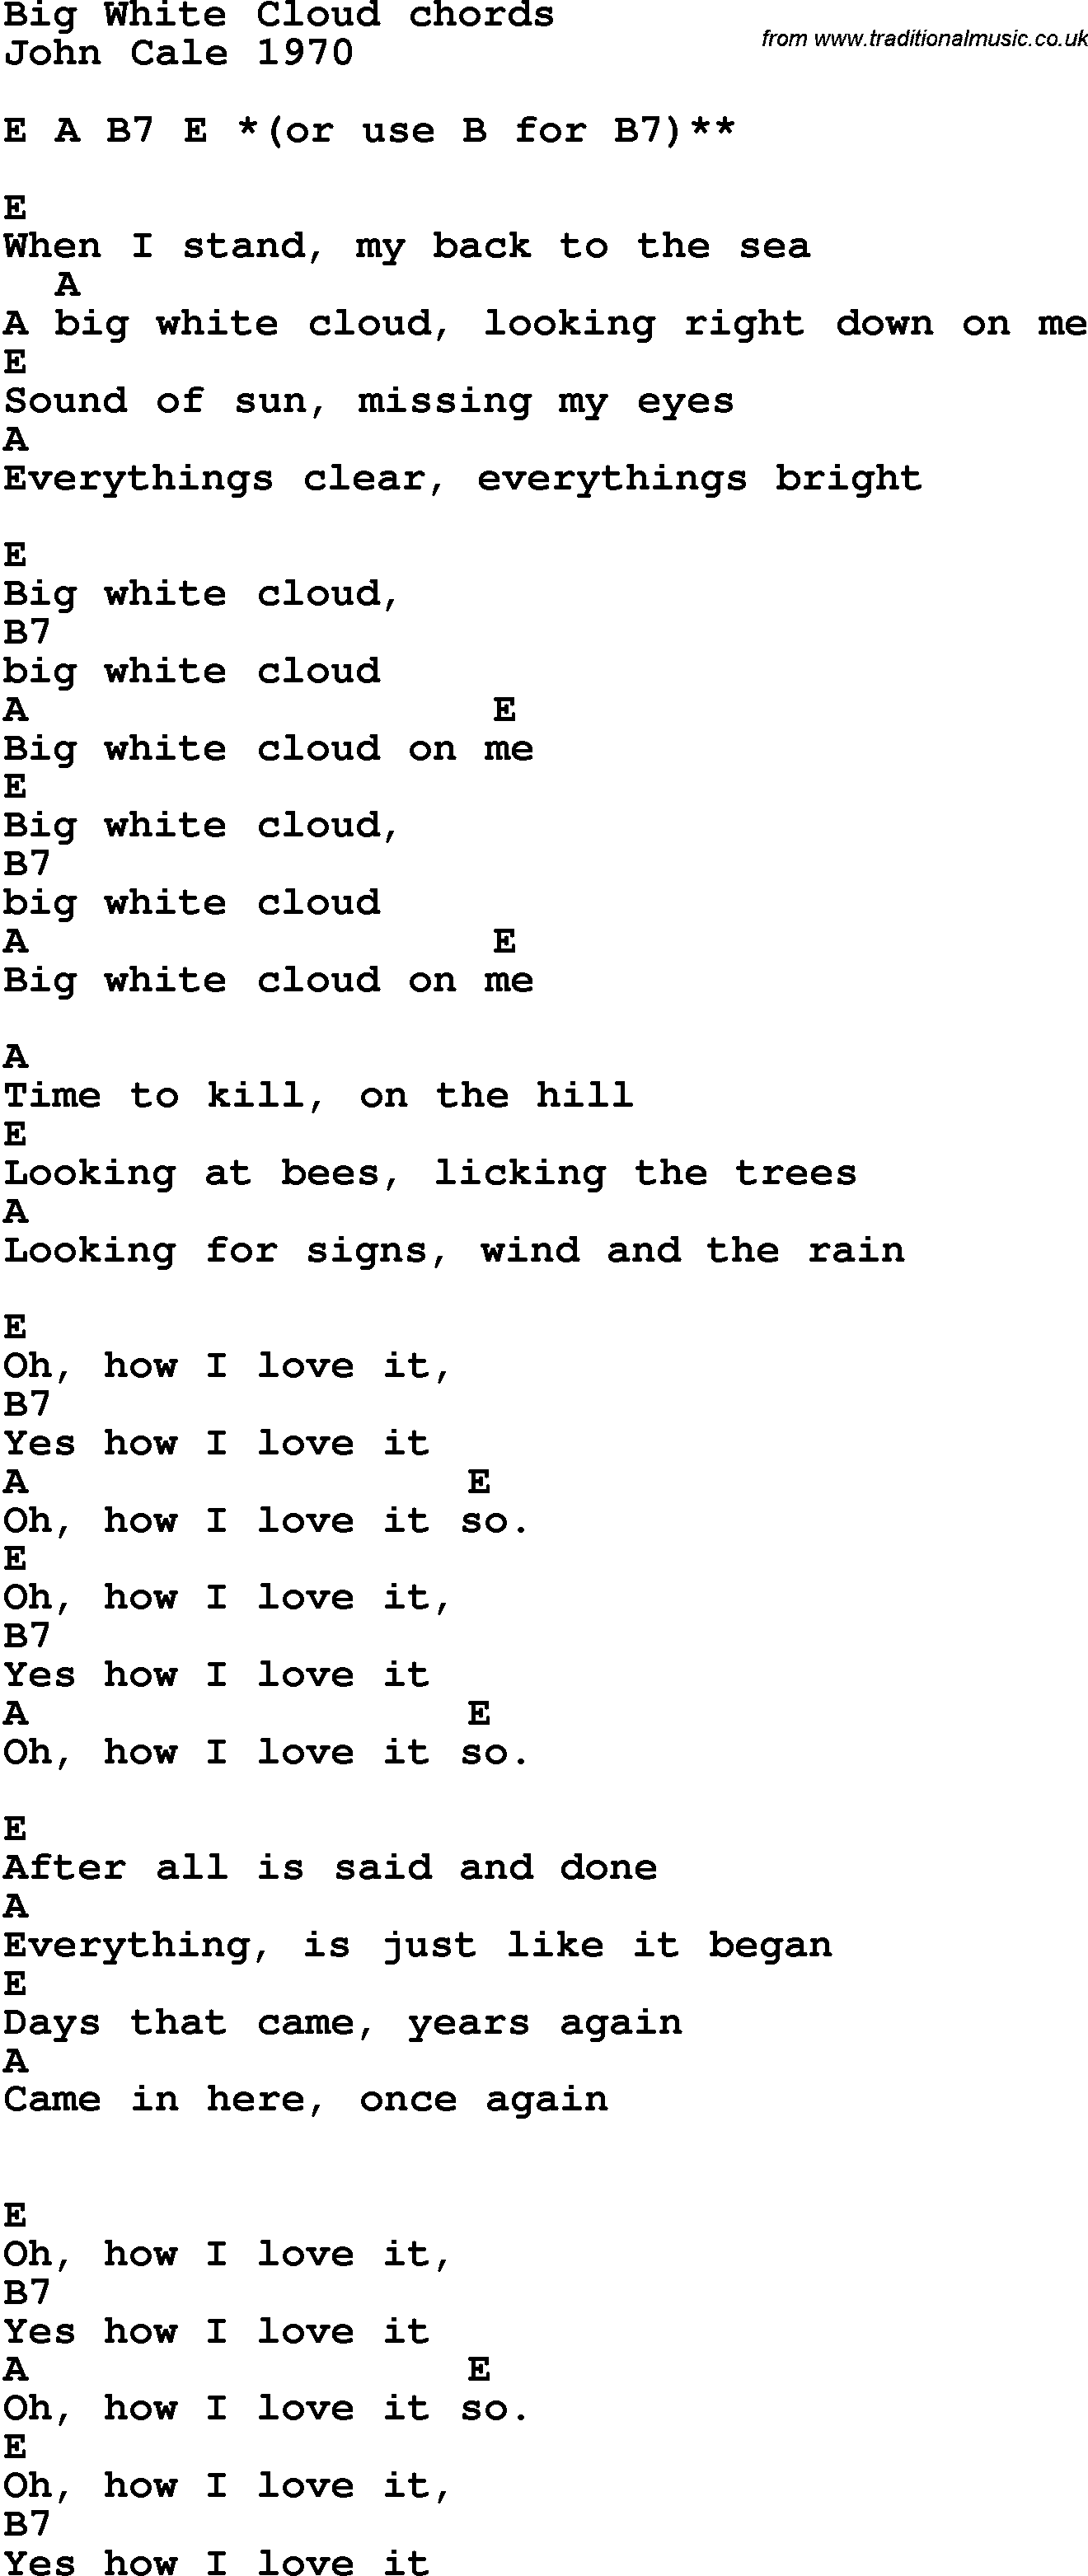 Song Lyrics with guitar chords for Big White Cloud